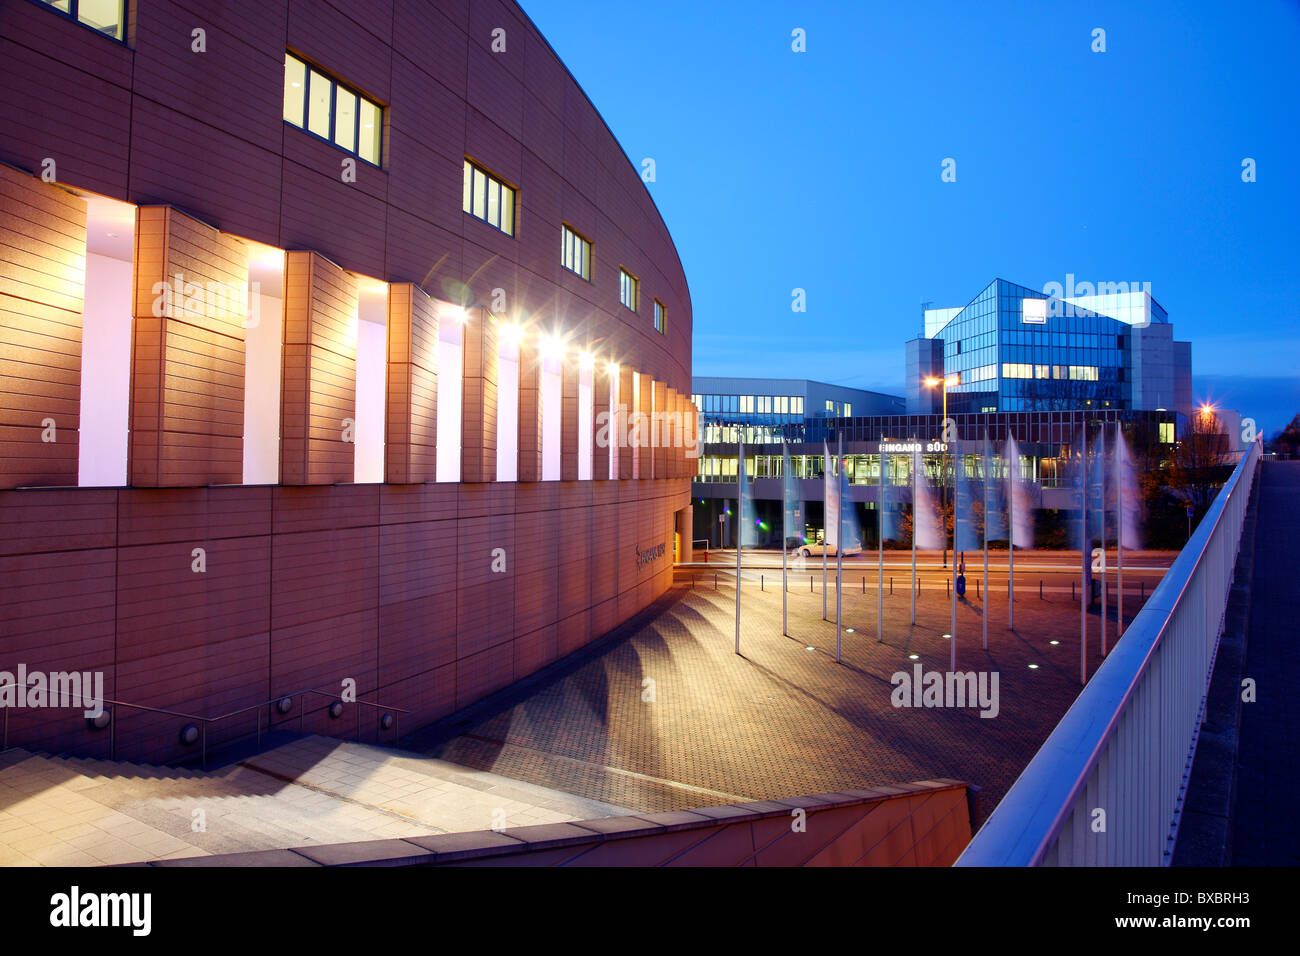 Fairground buildings and congress center of Messe Essen, Germany Stock Photo